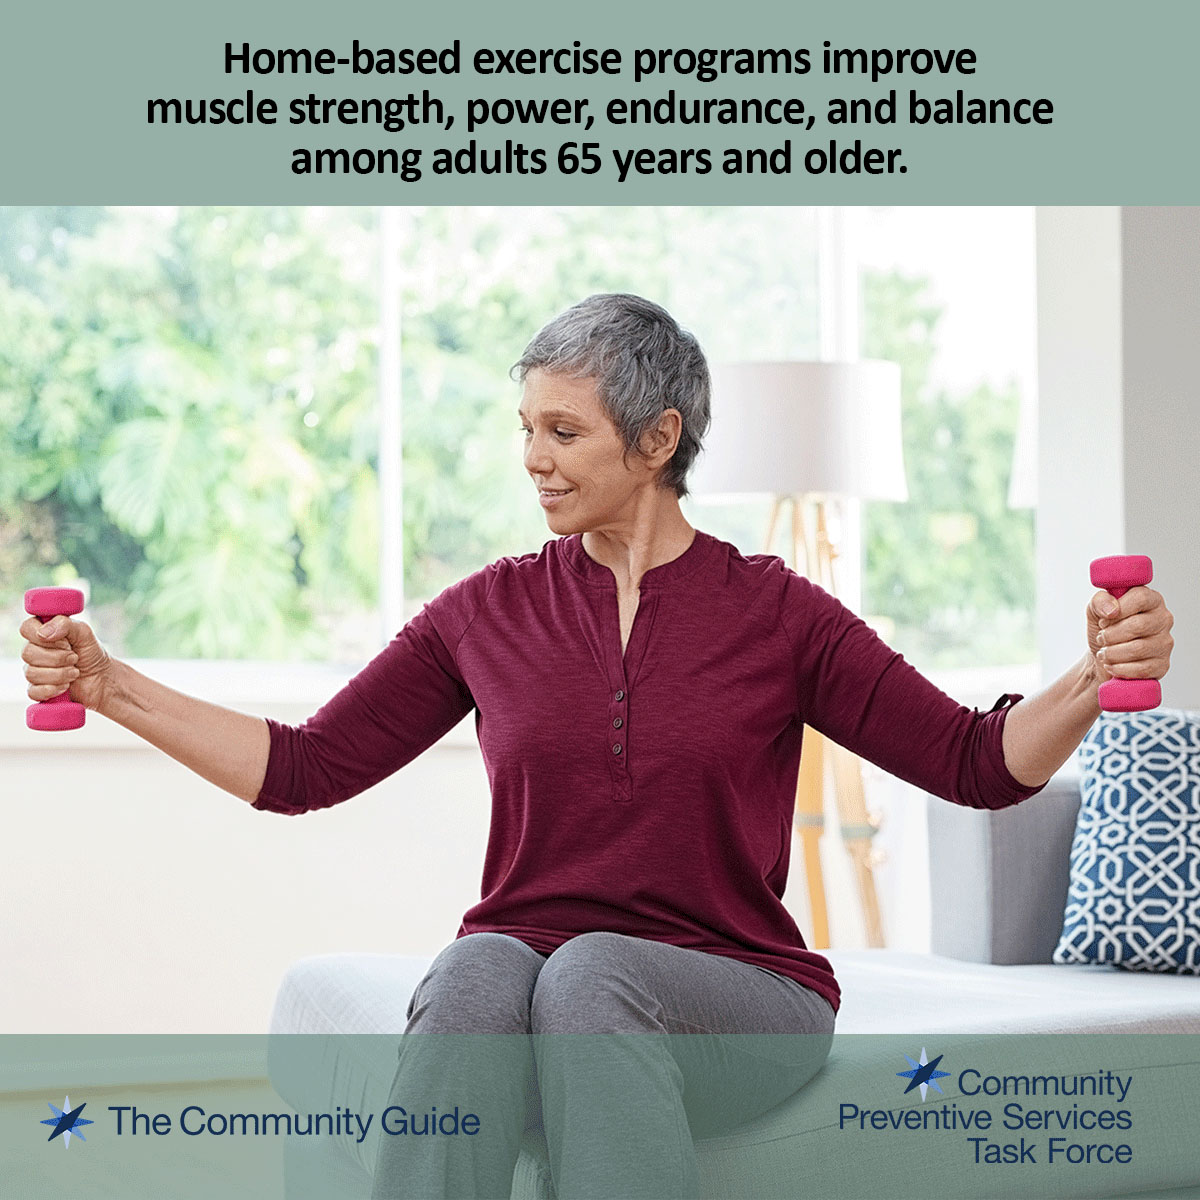 Use this image of an older woman exercising to promote the CPSTF finding for Home-based Exercise Interventions for Adults Aged 65 years and Older on your social media accounts.